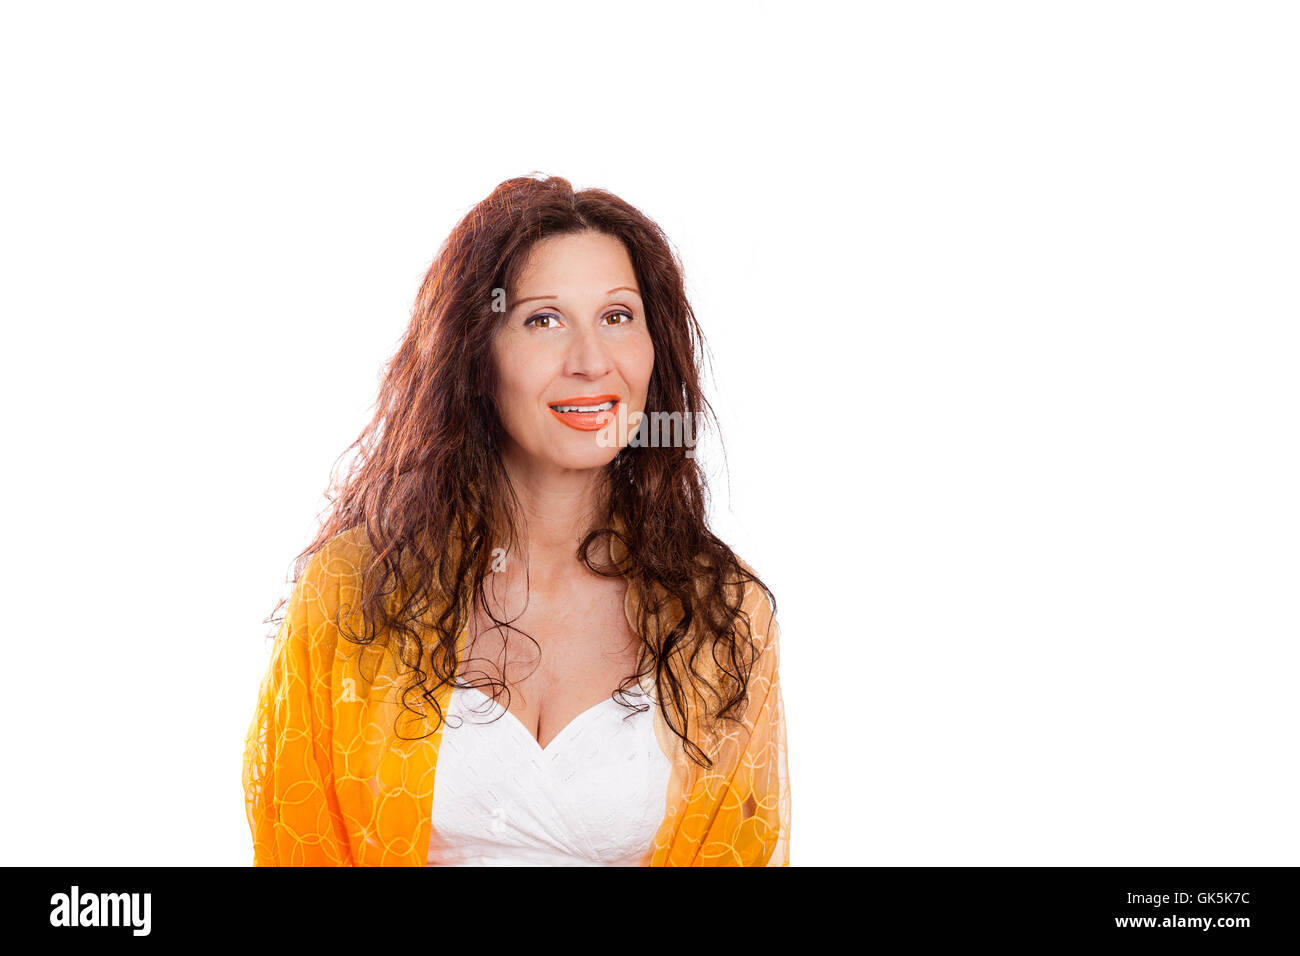 Portrait of gorgeous mature Caucasian woman with Arab and Middle Eastern features smiling while wearing shawl on shoulders against white background Stock Photo